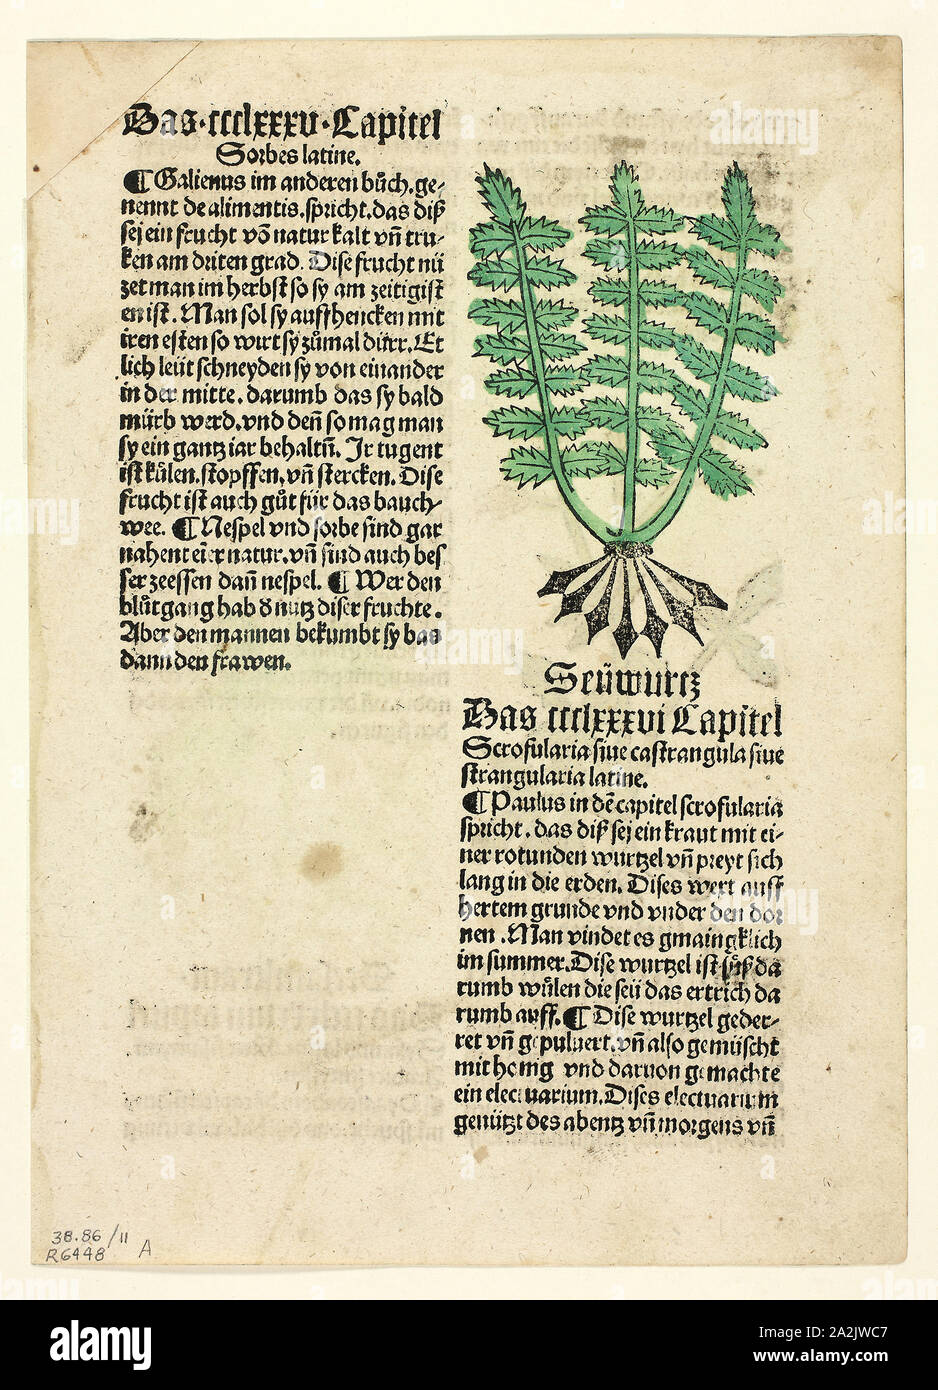 Figwort (recto), and Bloodroot (verso), from Gart der Gesundheit (Garden of Health), Plate 11 from Woodcuts from Books of the 15th Century, c. 1499, portfolio assembled 1929, Unknown Artist  (Augsburg, 15th century), printed and published by Johann Schönsperger the Elder (German, c. 1455–1521), original text by Johann Wonnecke von Cube (German, c. 1430–1503), portfolio text by Wilhelm Ludwig Schreiber (German, 1855–1932), Germany, Woodcut in black with hand-colored additions and letterpress in black (recto and verso) on cream laid paper, tipped onto cream wove paper mat, 110 x 63 mm (image Stock Photo